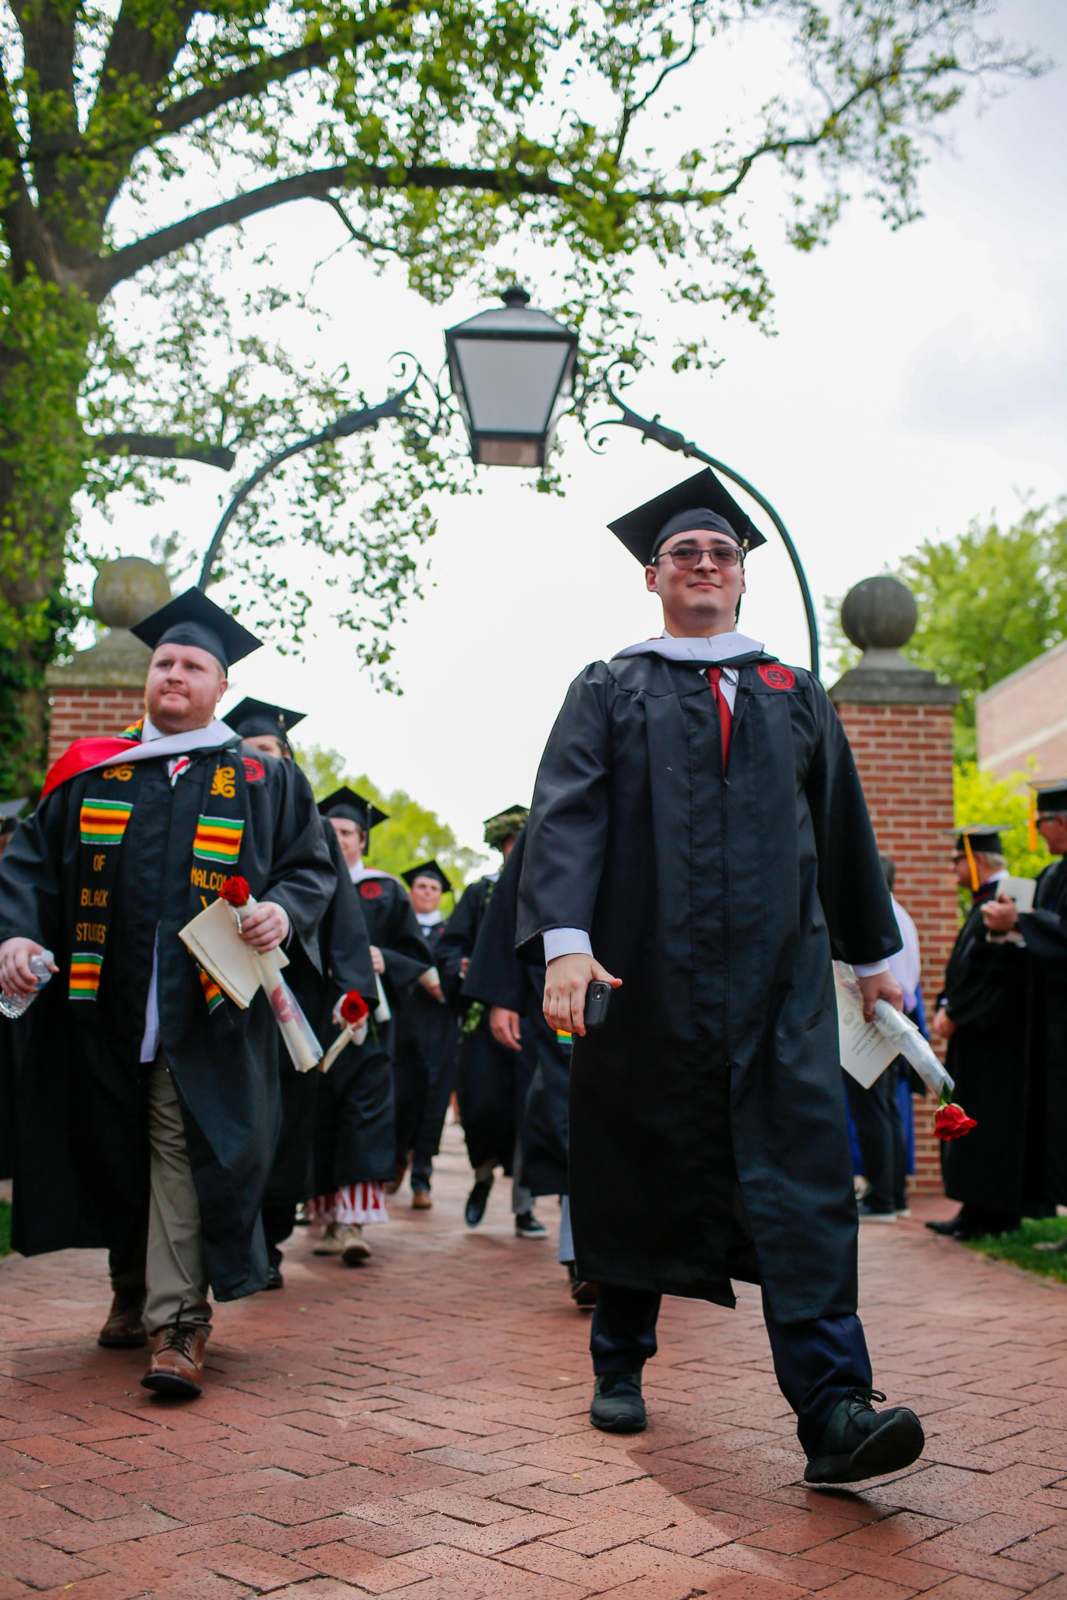 a group of people in graduation gowns and caps walking down a brick path